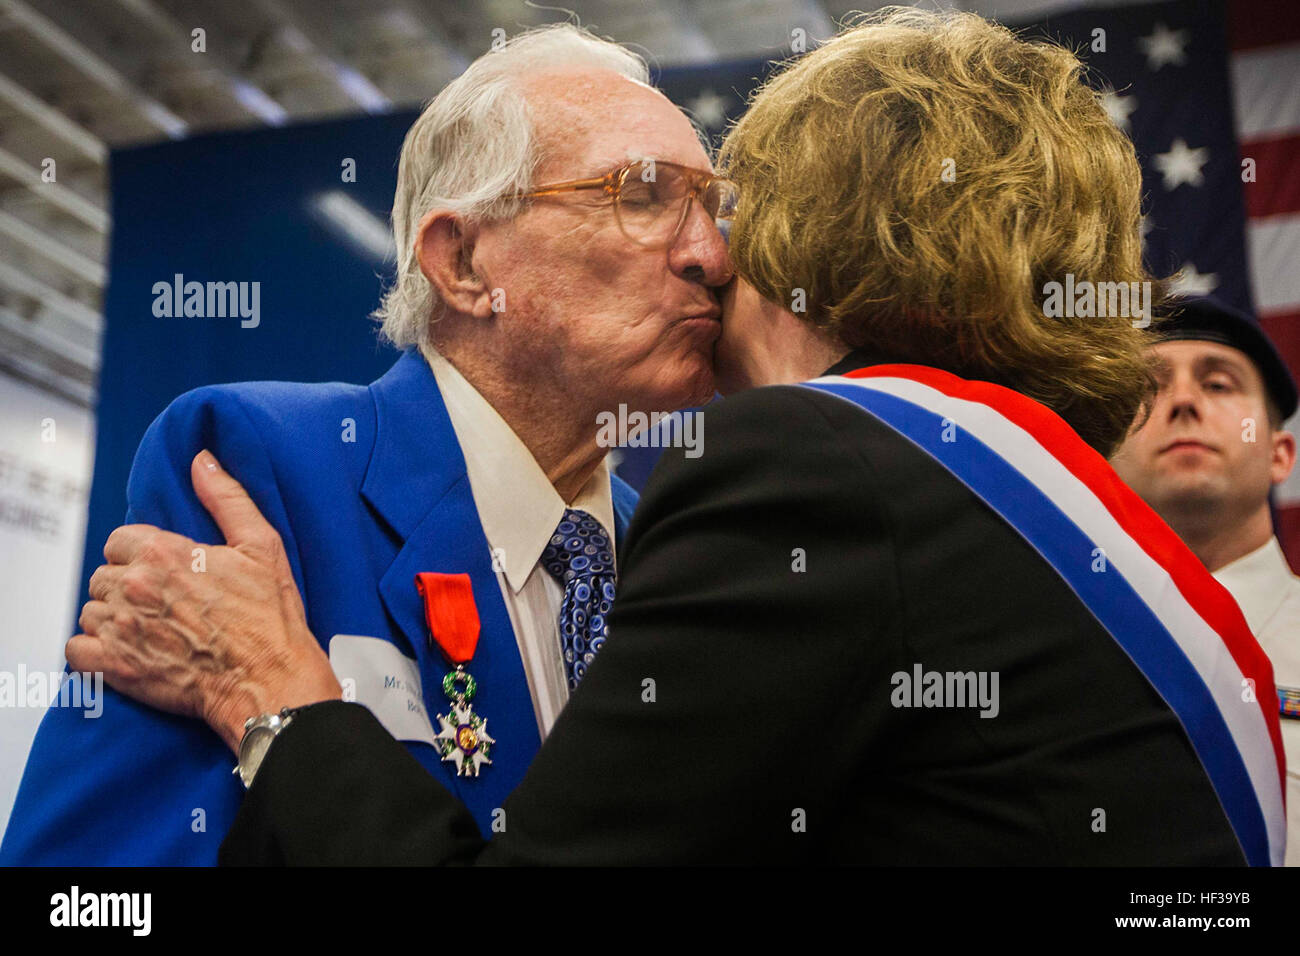 Bob Inman, U.S. Navy World War II veteran, kisses  Jacky Deromedi, France’s senator representing citizens living abroad, after she awarded him the Legion of Honor Medal, France’s highest military honor, for his service in World War II during a ceremony aboard the amphibious assault ship USS Wasp (LHD 1) at Port Everglades, Fla., May 9 for Fleet Week 2015. U.S. Marines and U.S. Navy Sailors of the MEU, from Marine Corps Base Camp Lejeune, N.C., participated in Fleet Week Port Everglades May 4-10. The purpose of Fleet Week was to showcase the strength and capabilities of the Navy and Marine Corp Stock Photo